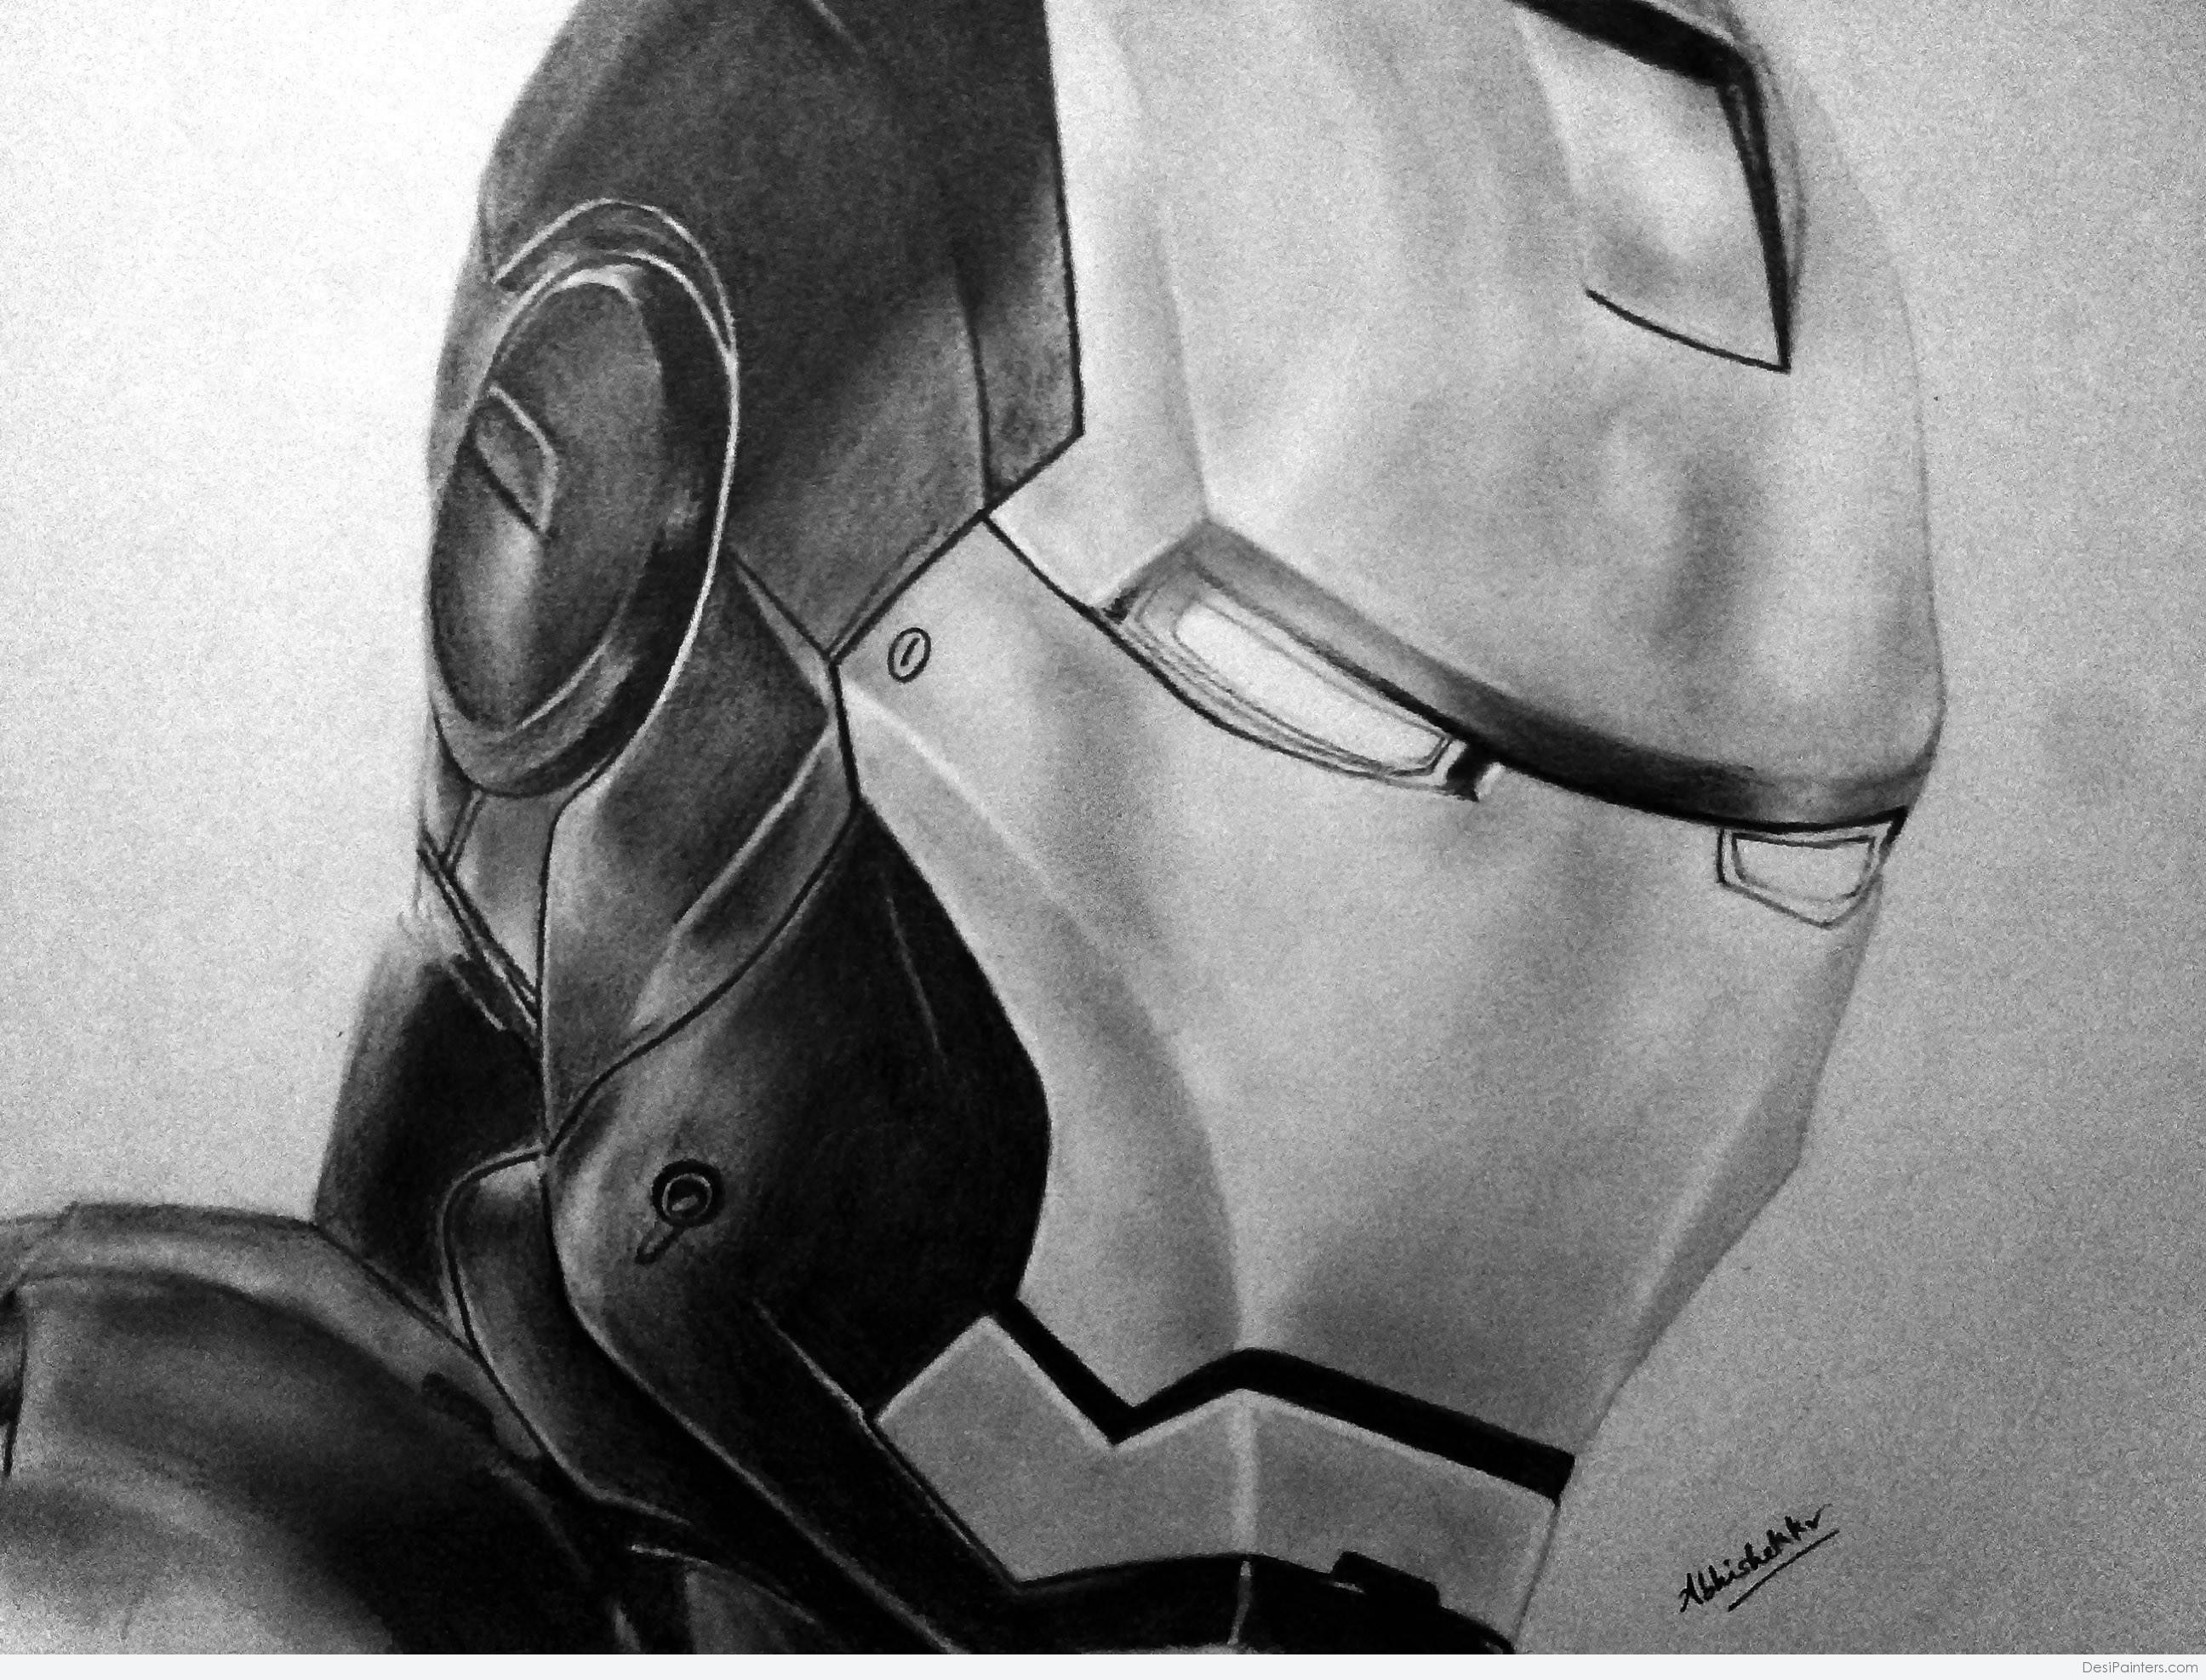 How to Draw Iron Man - Easy Drawing Art